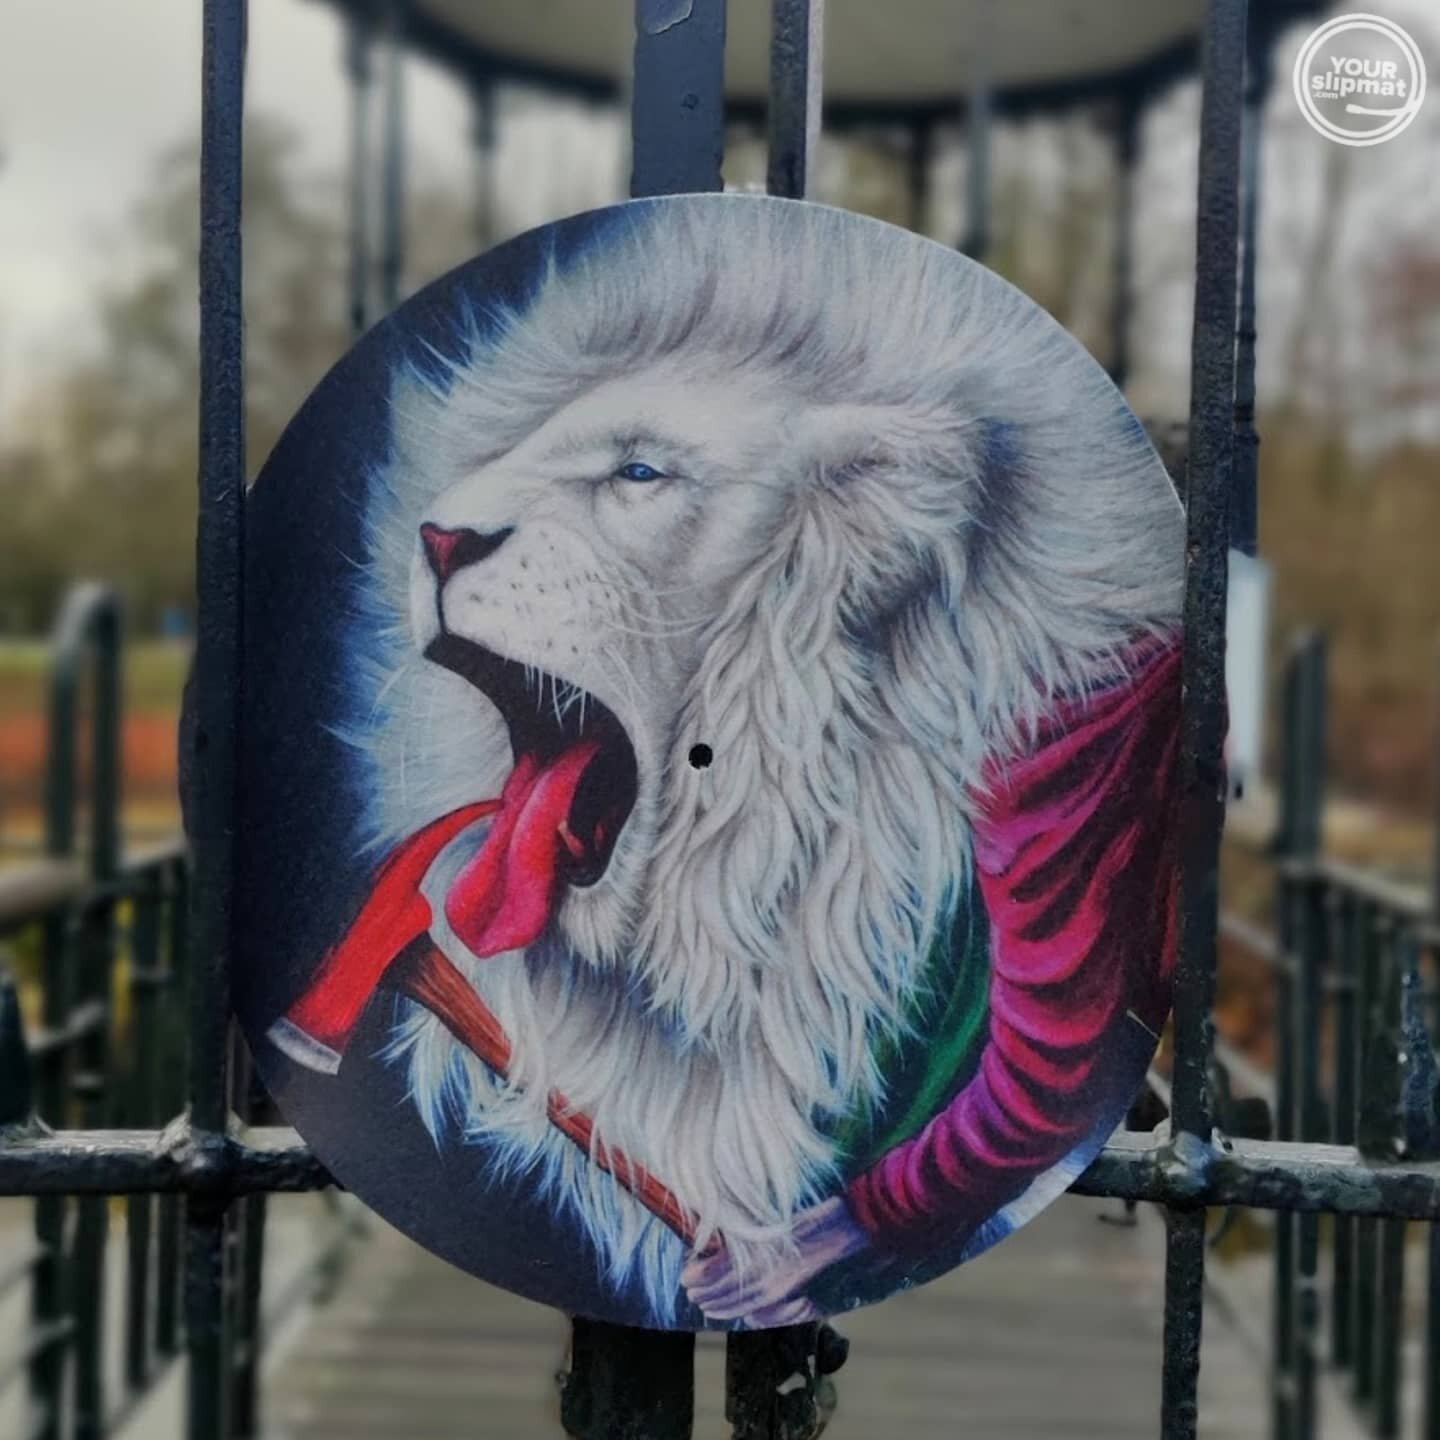 RAAWWW 🦁 Awesome design 'Eupnea' by @purereasonrevolution_official, and for sale @  Pre reason revolution's bandcamp - see link @ comments 🤙 
. 
#slipmat #customslipmat #slipmats #eupnea #purereasonrevolution #12inch #durchmusicworks #vinyl #wax